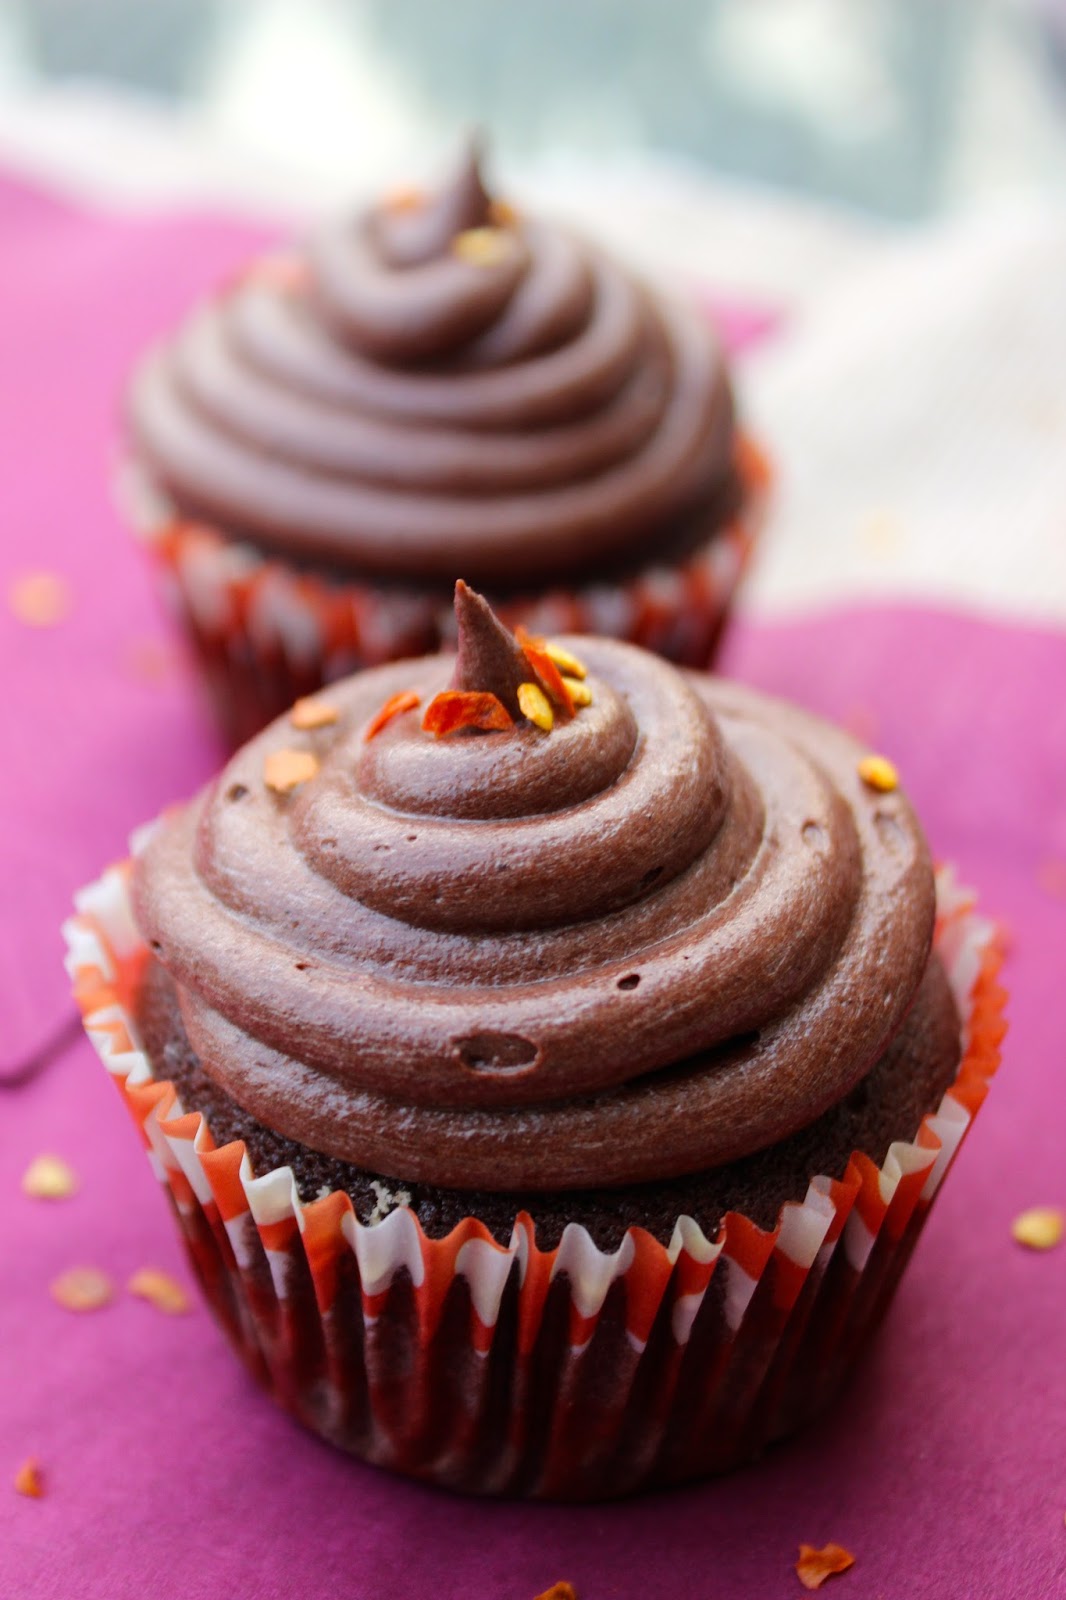 &amp;quot;Hot&amp;quot; Chocolate Cupcakes with Chocolate Frosting - Hot Chocolate Hits